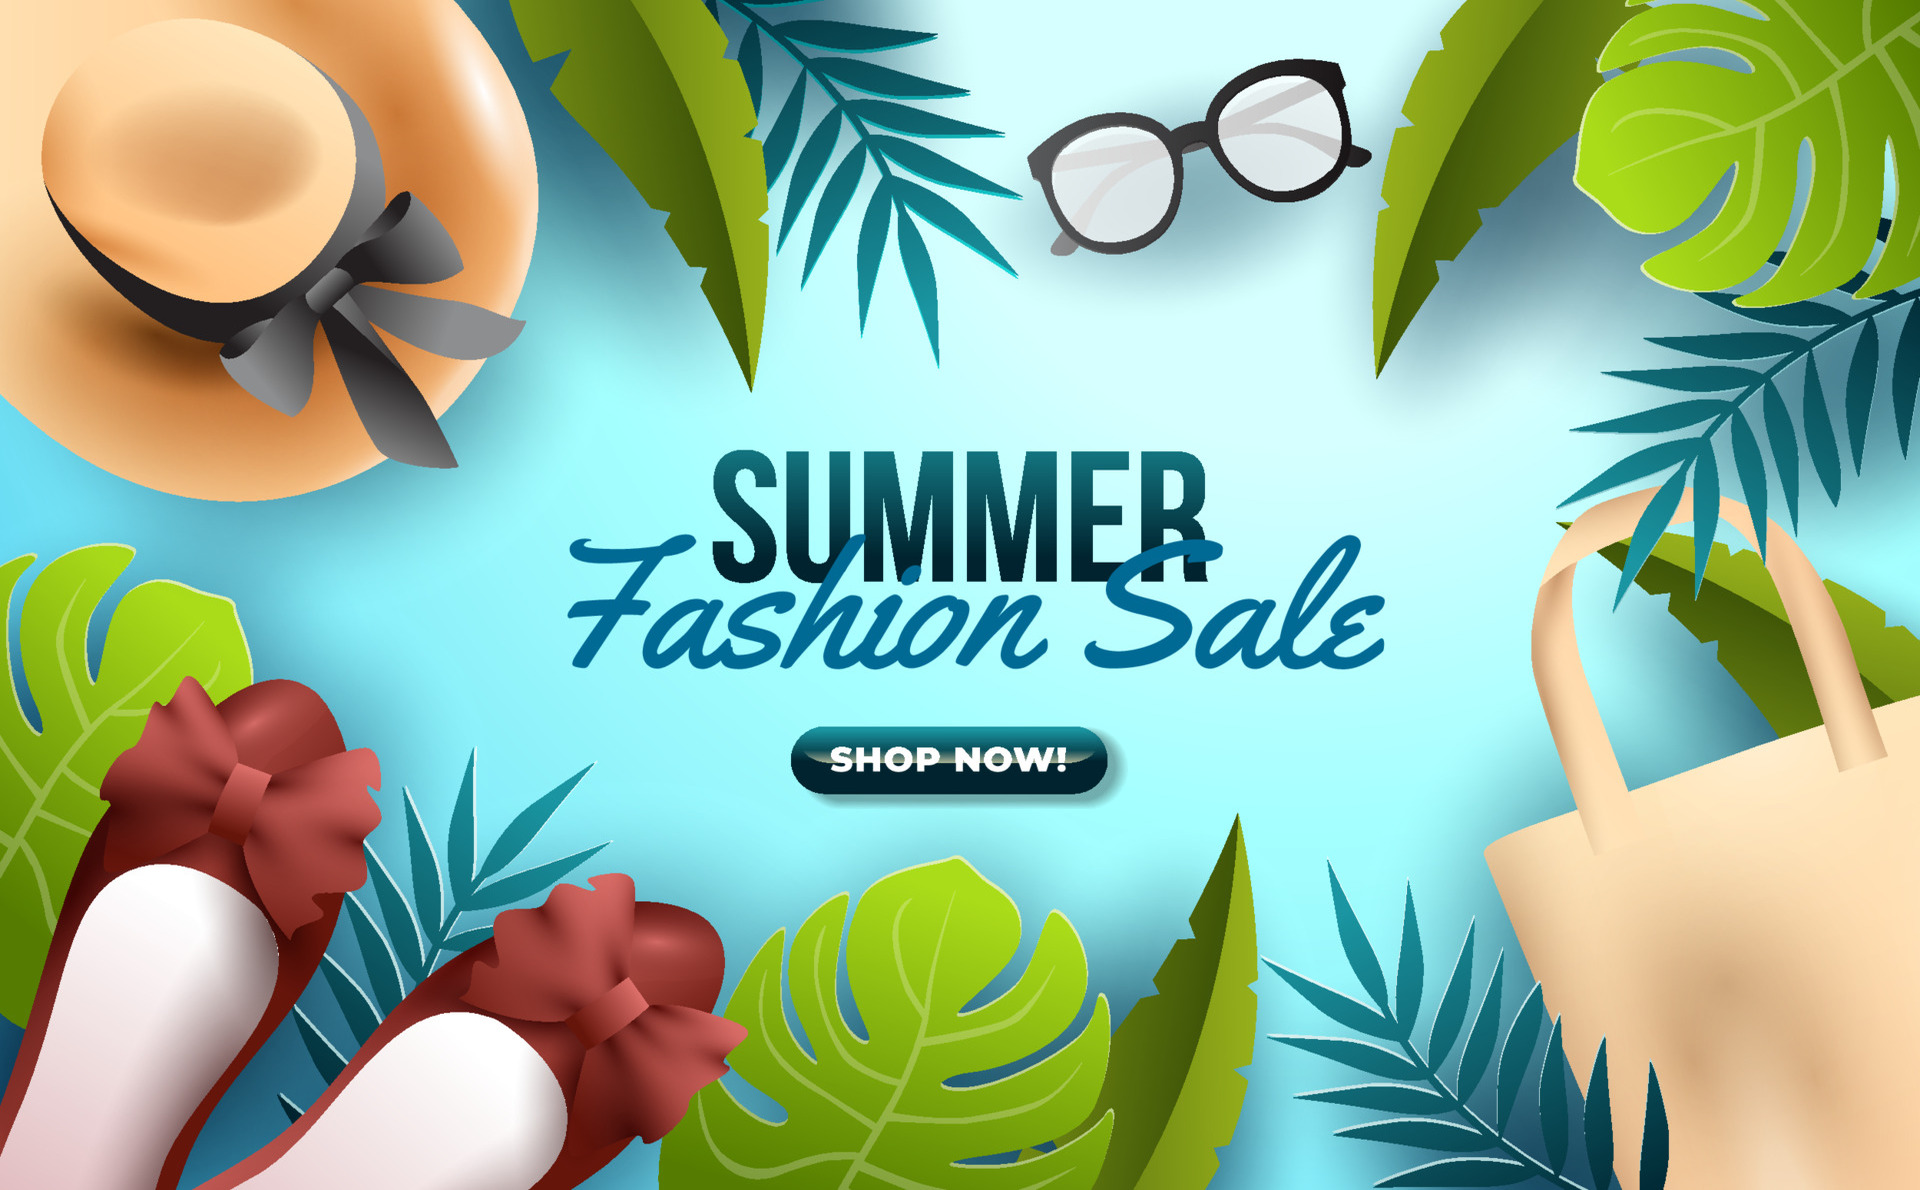 vecteezy_summer-fashion-sale-poster-background_9158500